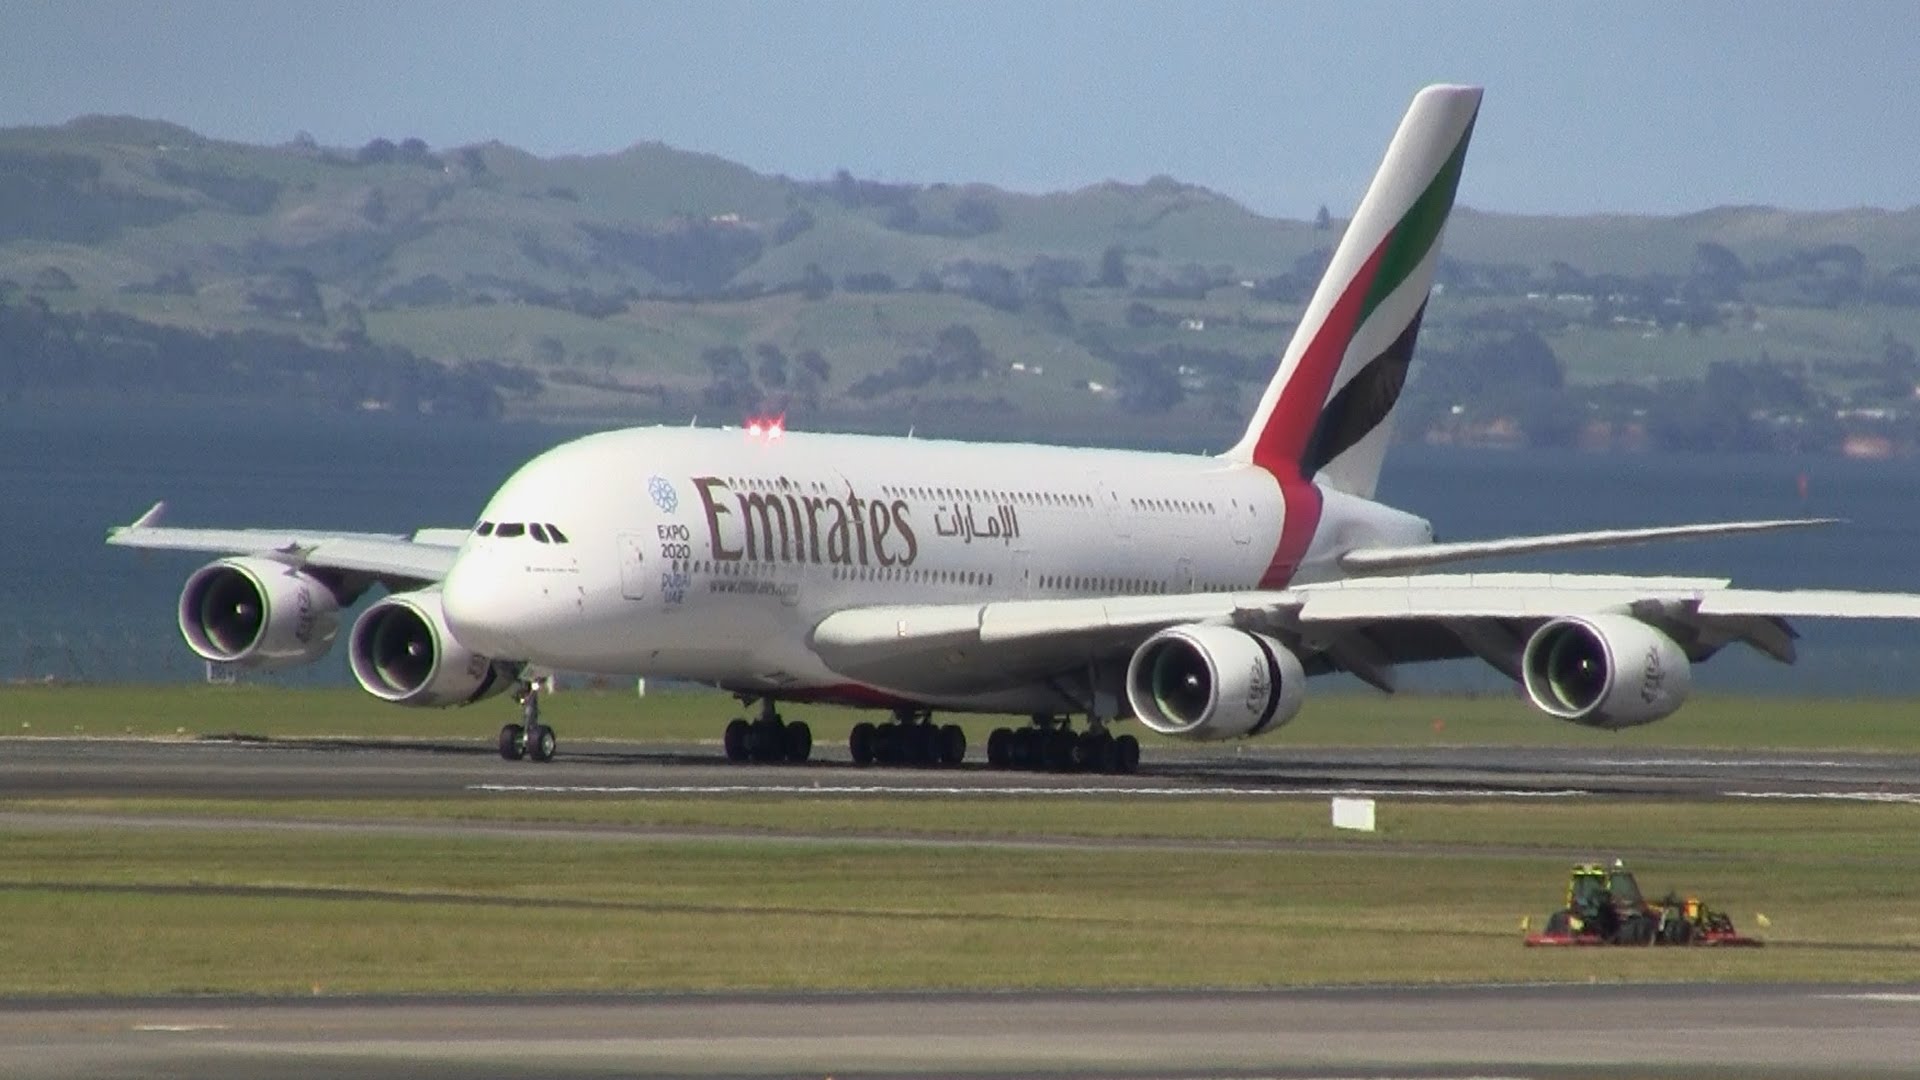 laptop ban uplifted says emirates turkish airlines